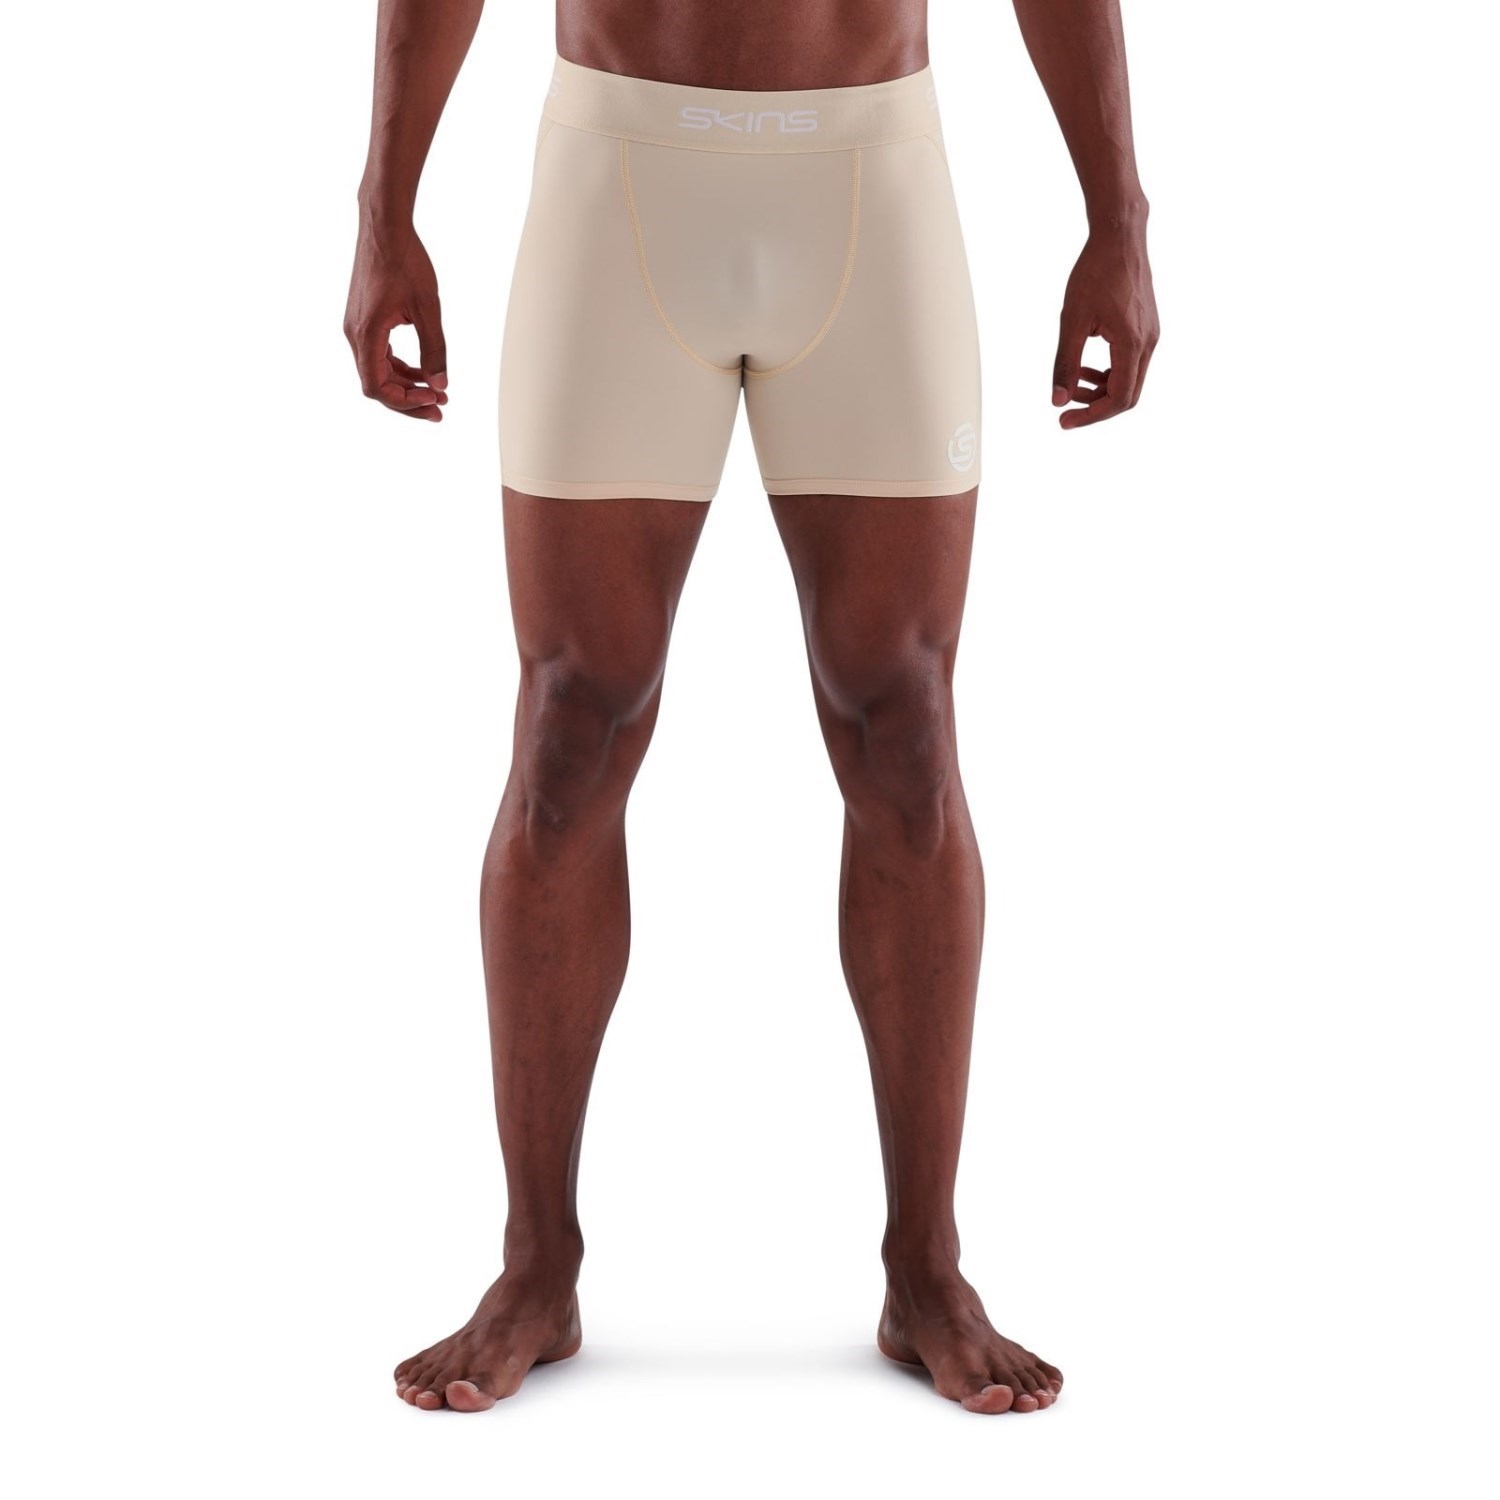 SKINS Compression Unisex Youth Beige Series 1 Half tight Shorts Size M